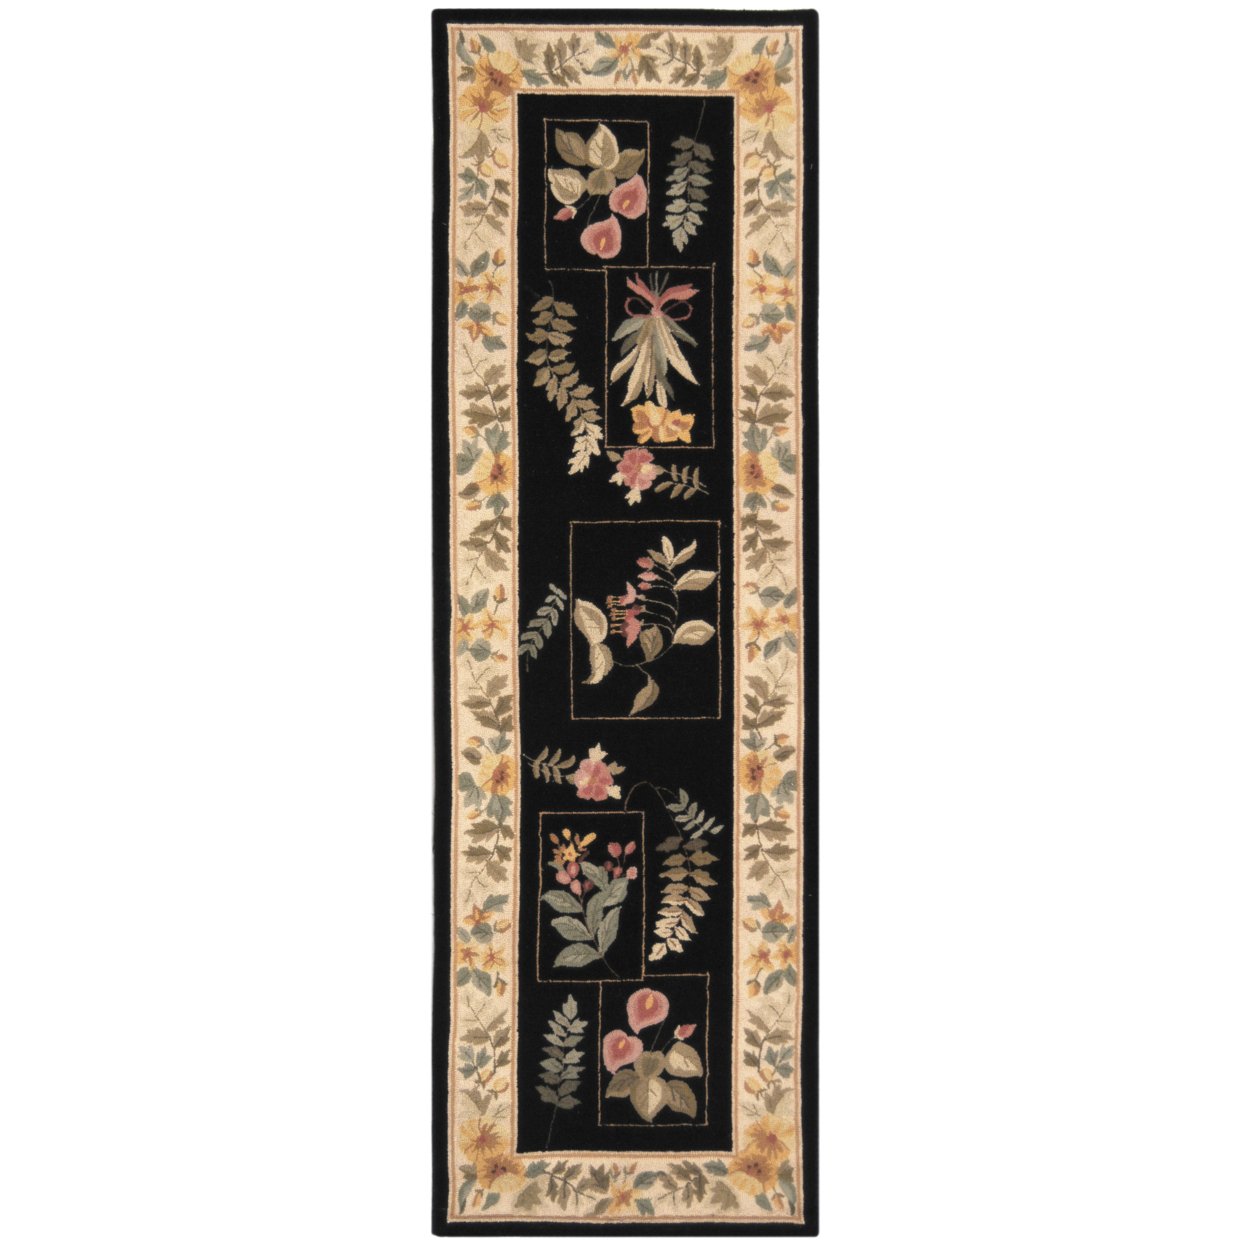 SAFAVIEH Chelsea Collection HK07B Hand-hooked Black Rug - 5' 3 X 8' 3